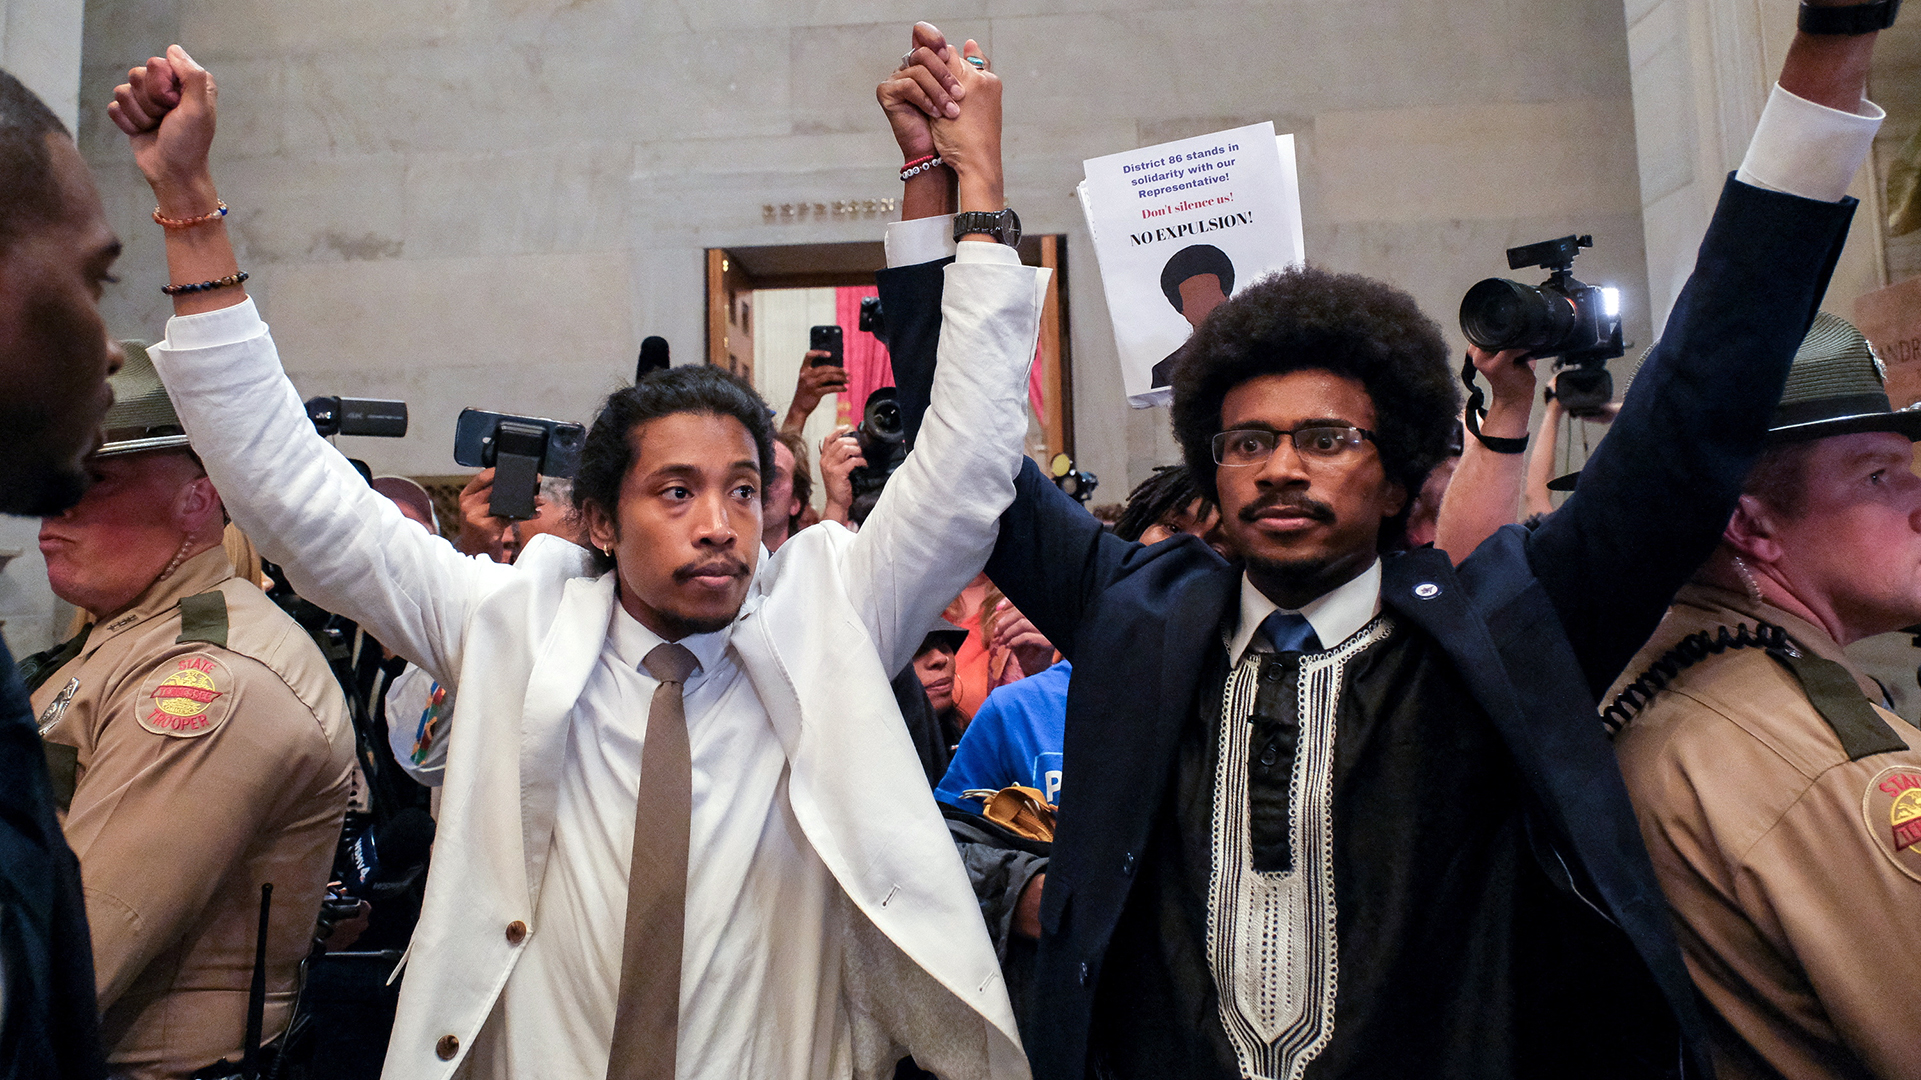 Justin Pearson and Justin Jones raise their hands after being expelled from their seats in Nashville.